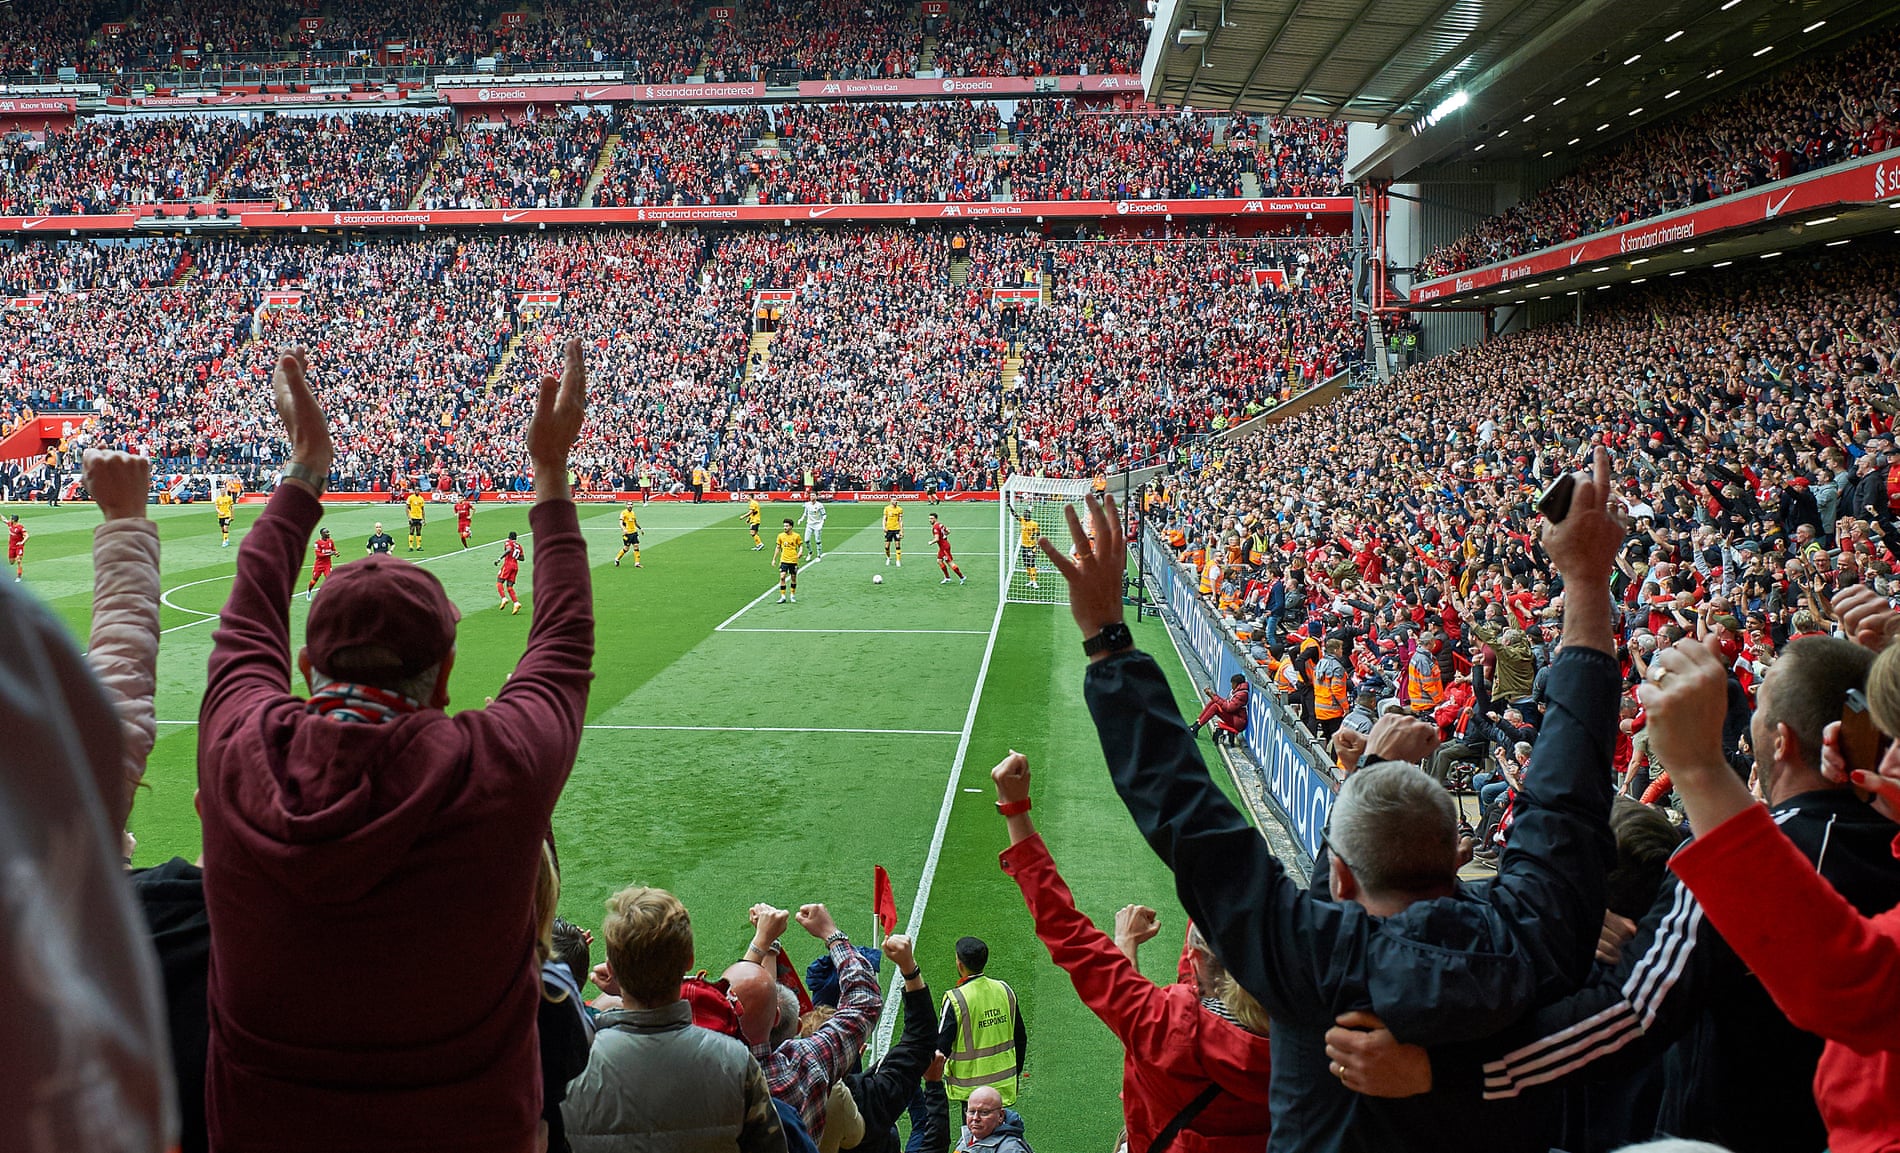 Liverpool fans celebrate during their win over Wolves on the final day of last season, but it was not enough to deny Manchester City the title.